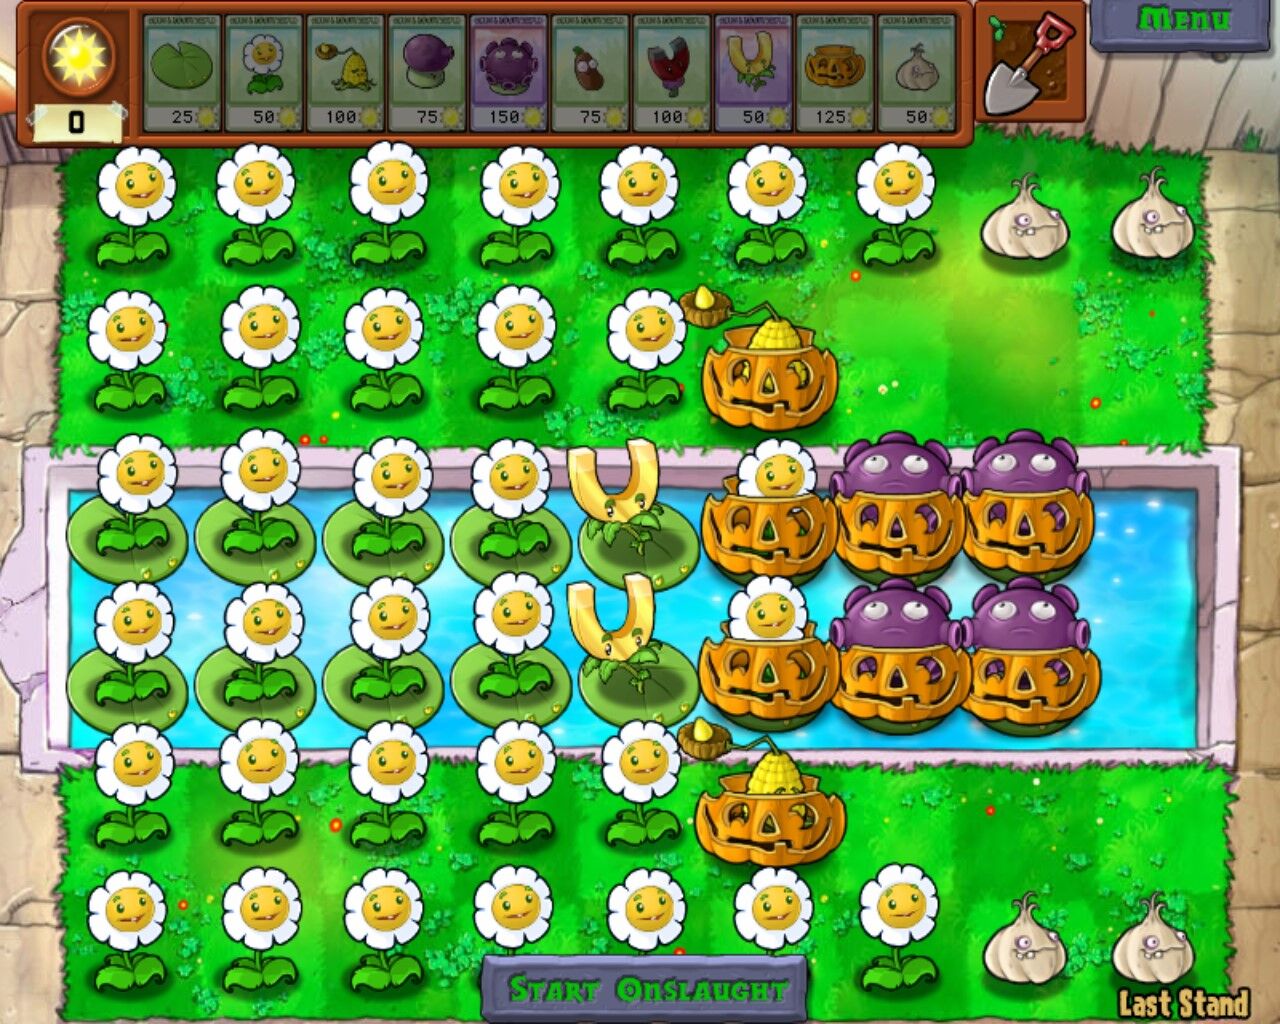 How to Cheat on Plants Vs Zombies: 11 Steps (with Pictures)